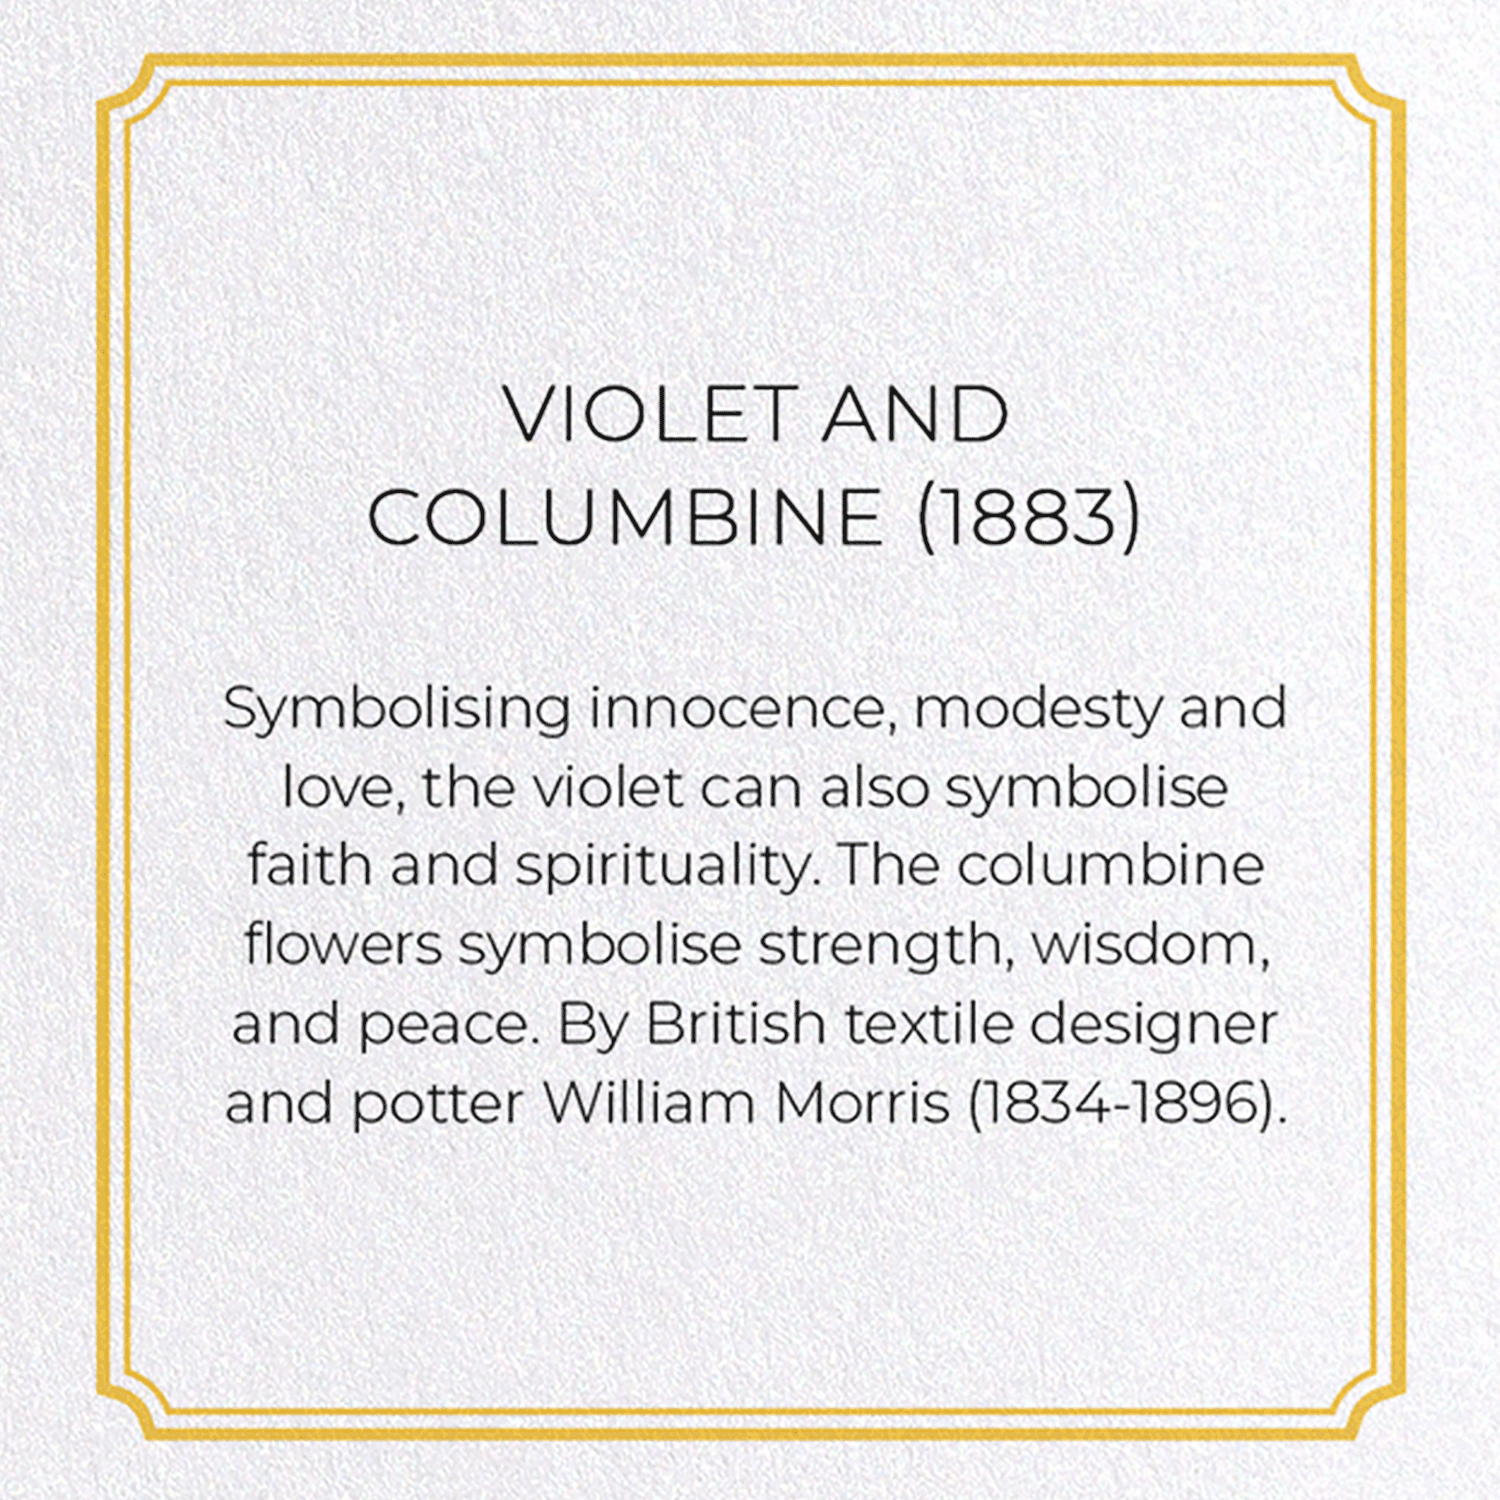 VIOLET AND COLUMBINE (1883): Pattern Greeting Card